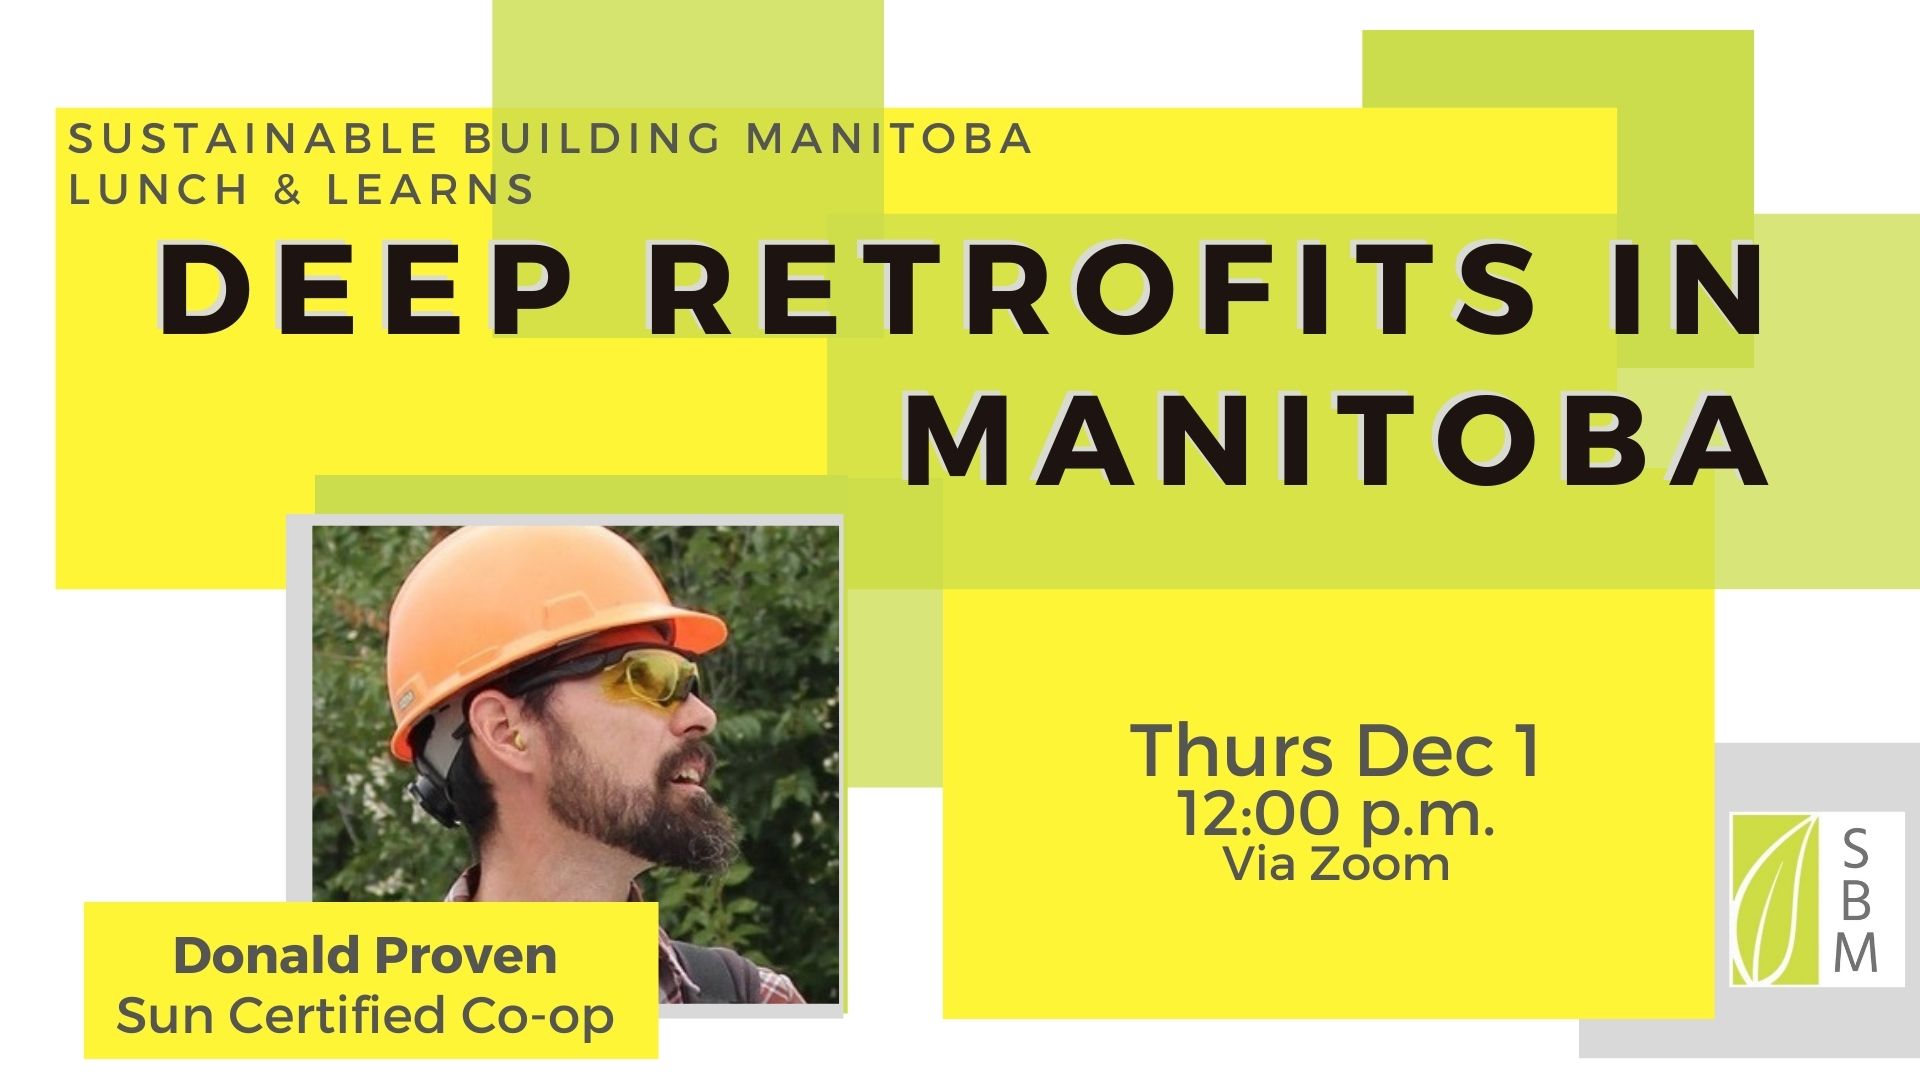 SBM Lunch and Learn Deep Retrofits in Manitoba Thursday december 1 noon on zoom